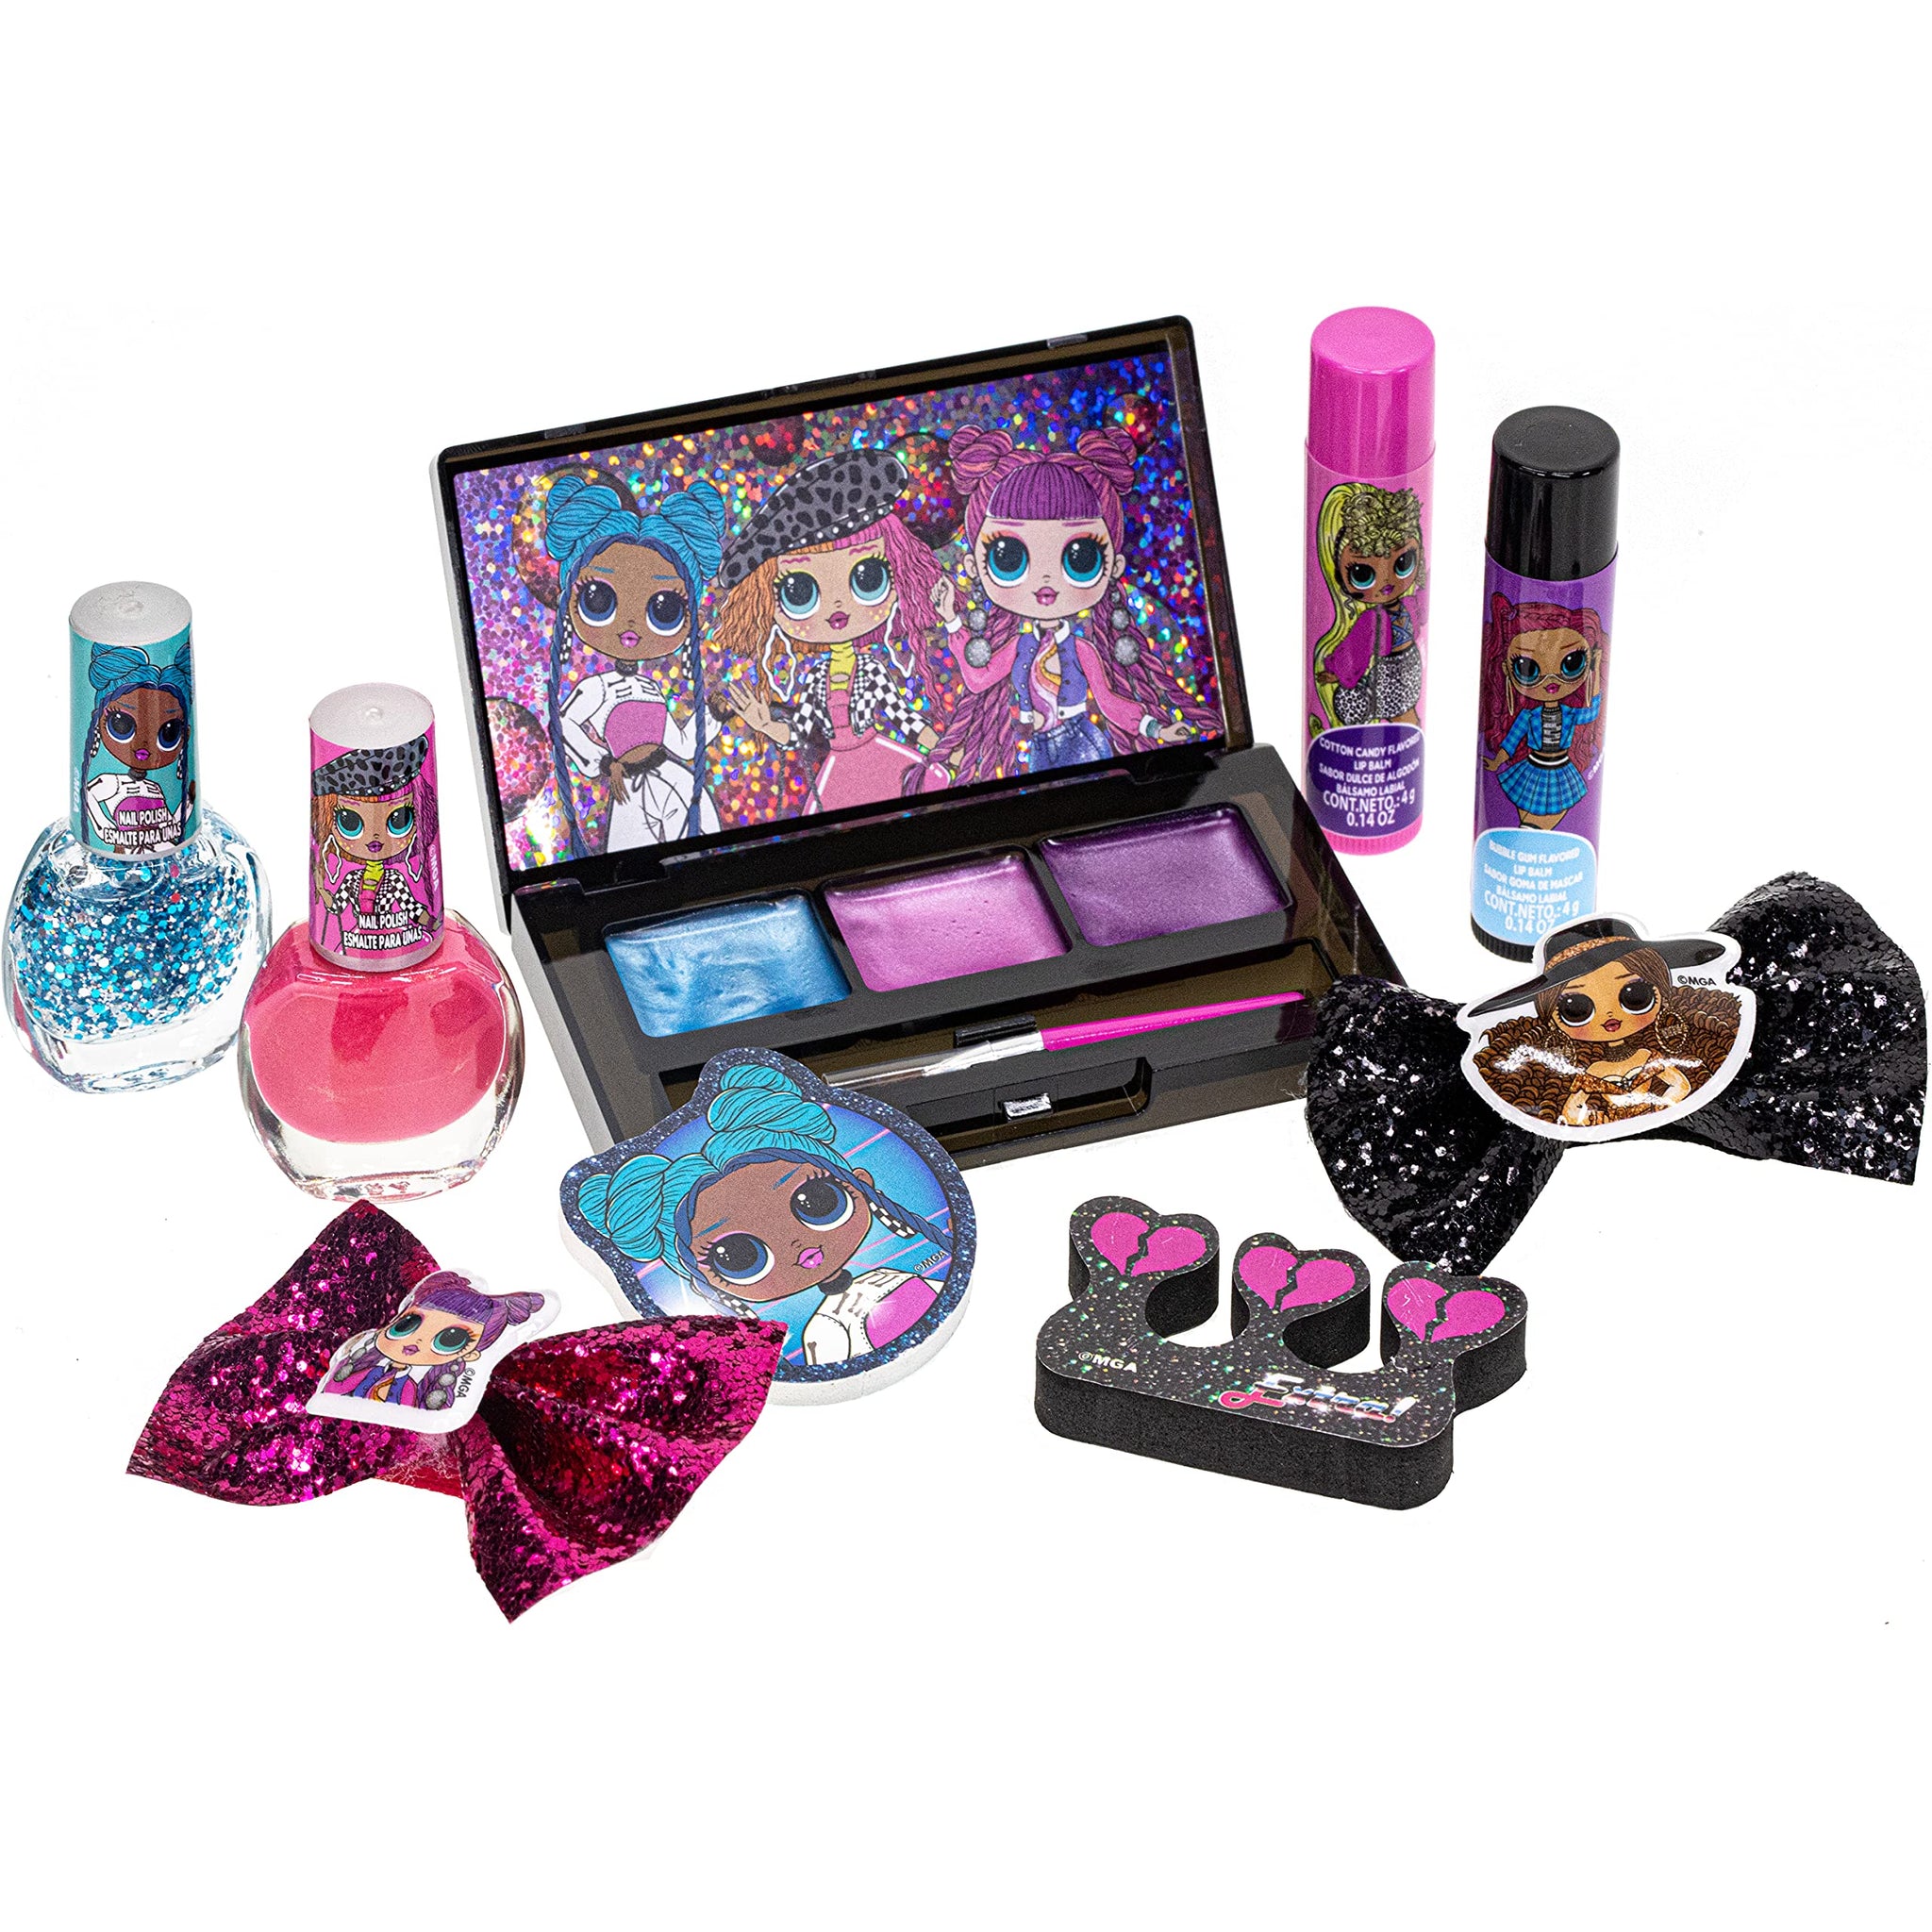 L.O.L Surprise! Townley Girl Backpack Cosmetic Makeup Set 10 Pieces, Including Lip Gloss, Nail Polish, Scrunchy, Mirror and Surprise Keychain, Ages 5+